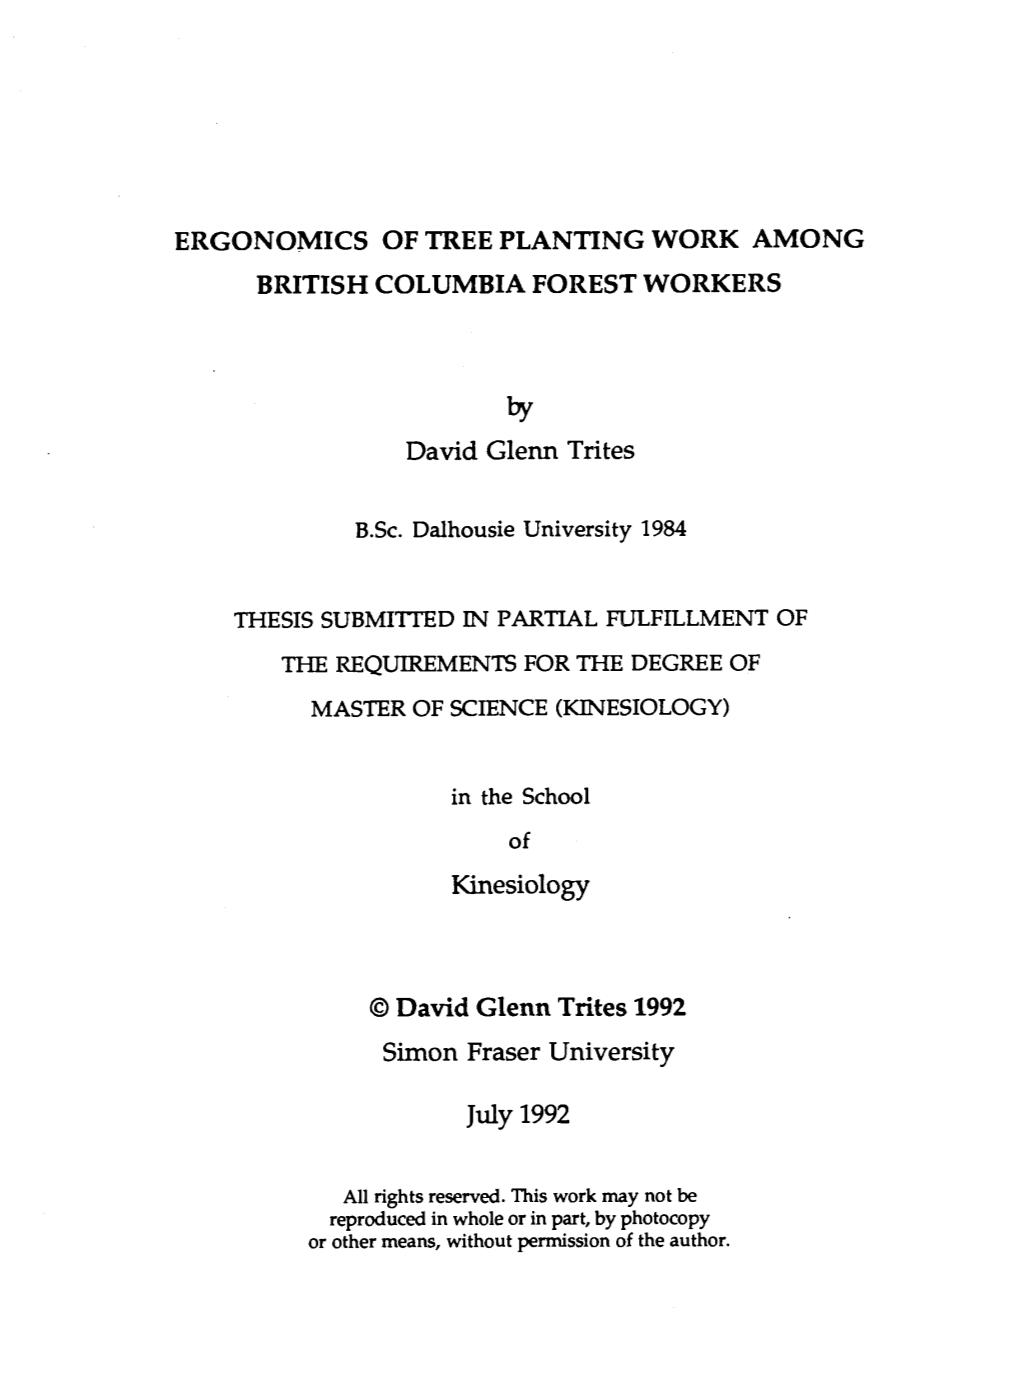 Ergonomics of Tree Planting Work Among British Columbia Forest Workers